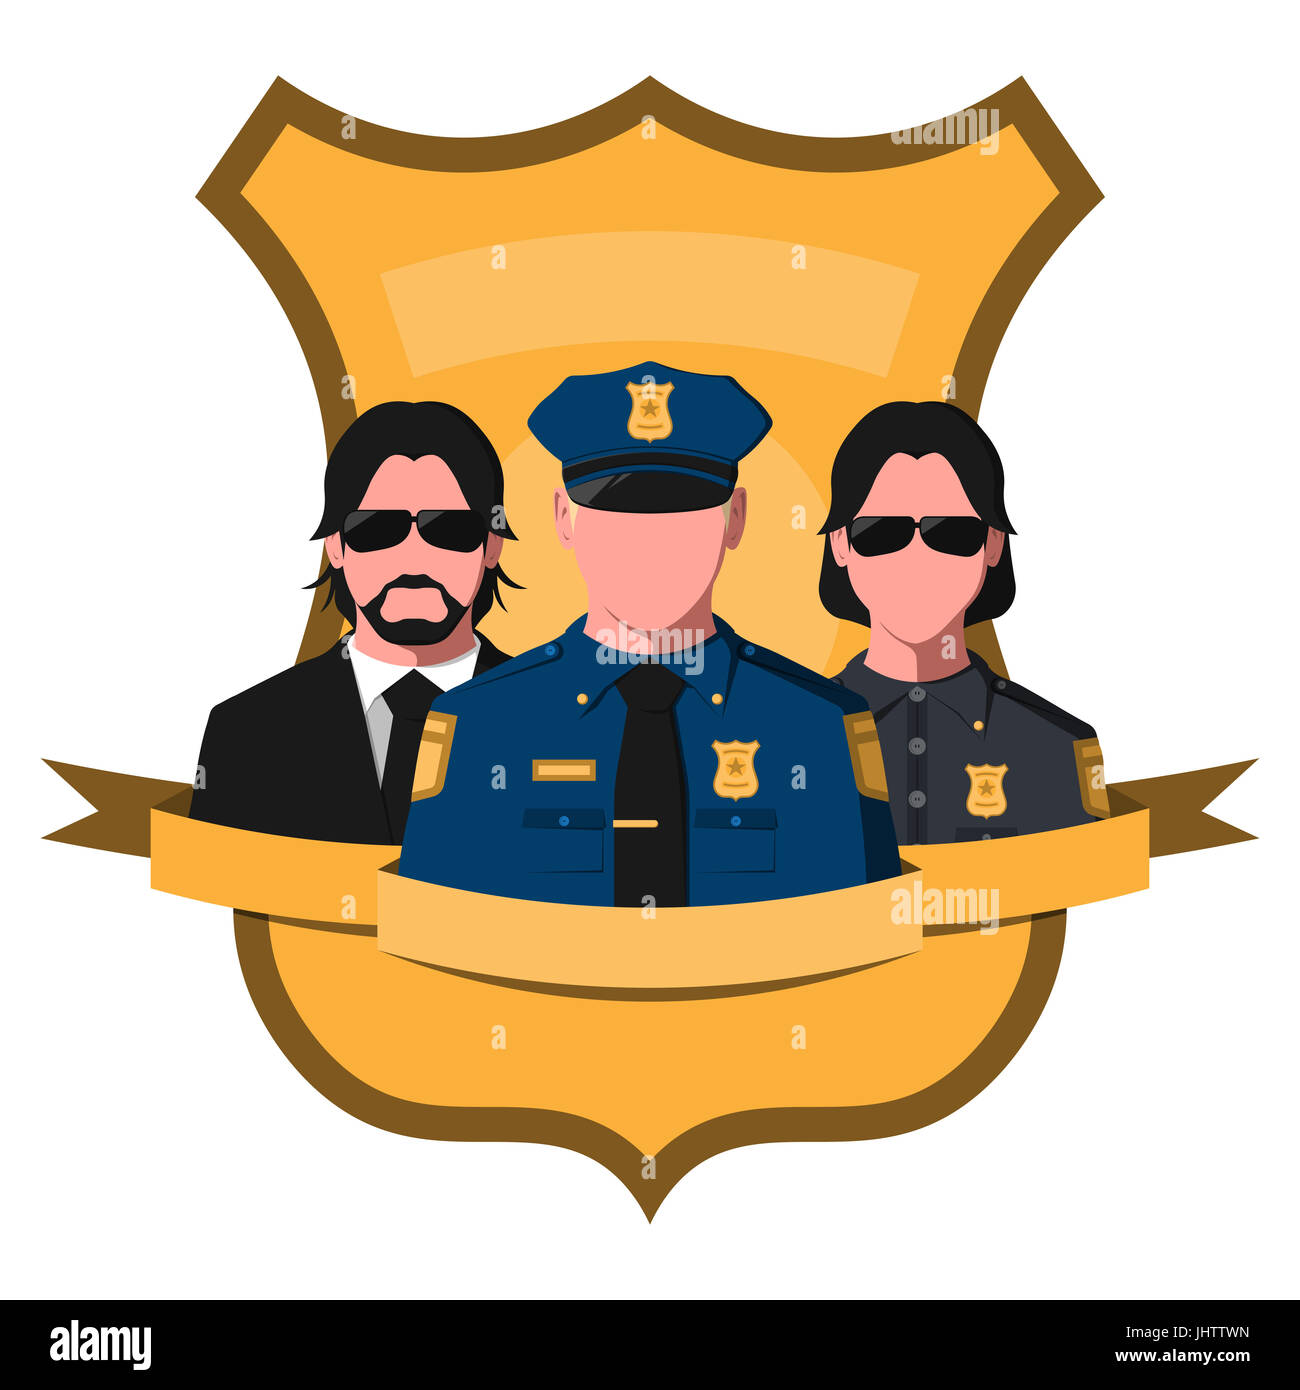 Flat avatar of police team. Emblem with silhouettes of policeman, sheriff and detective on a badge background. Illustration of police officers. Stock Photo